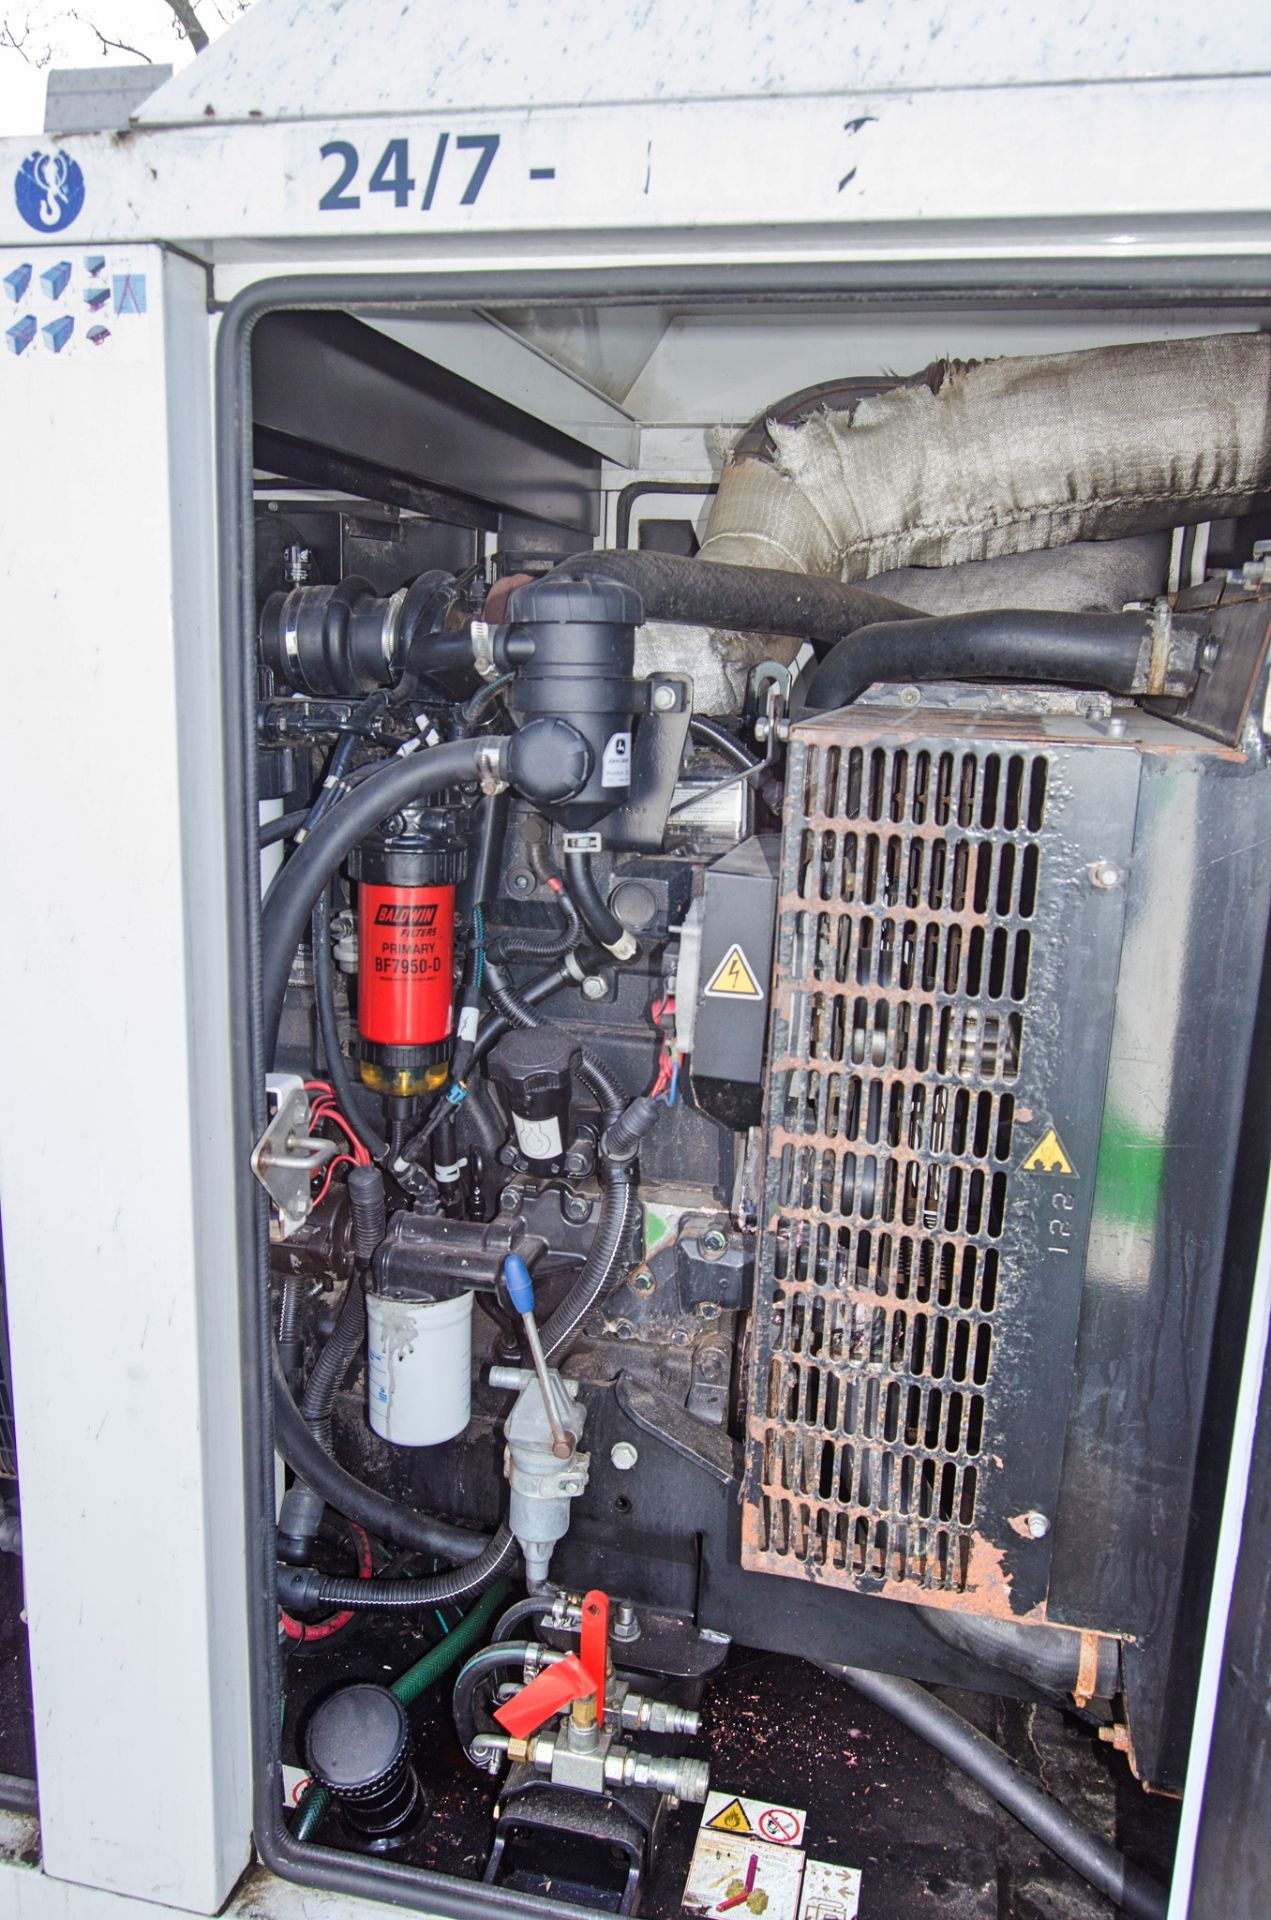 SDMO R110 110 kva diesel driven generator Recorded hours: 31531 ** Battery missing ** A676220 - Image 9 of 11